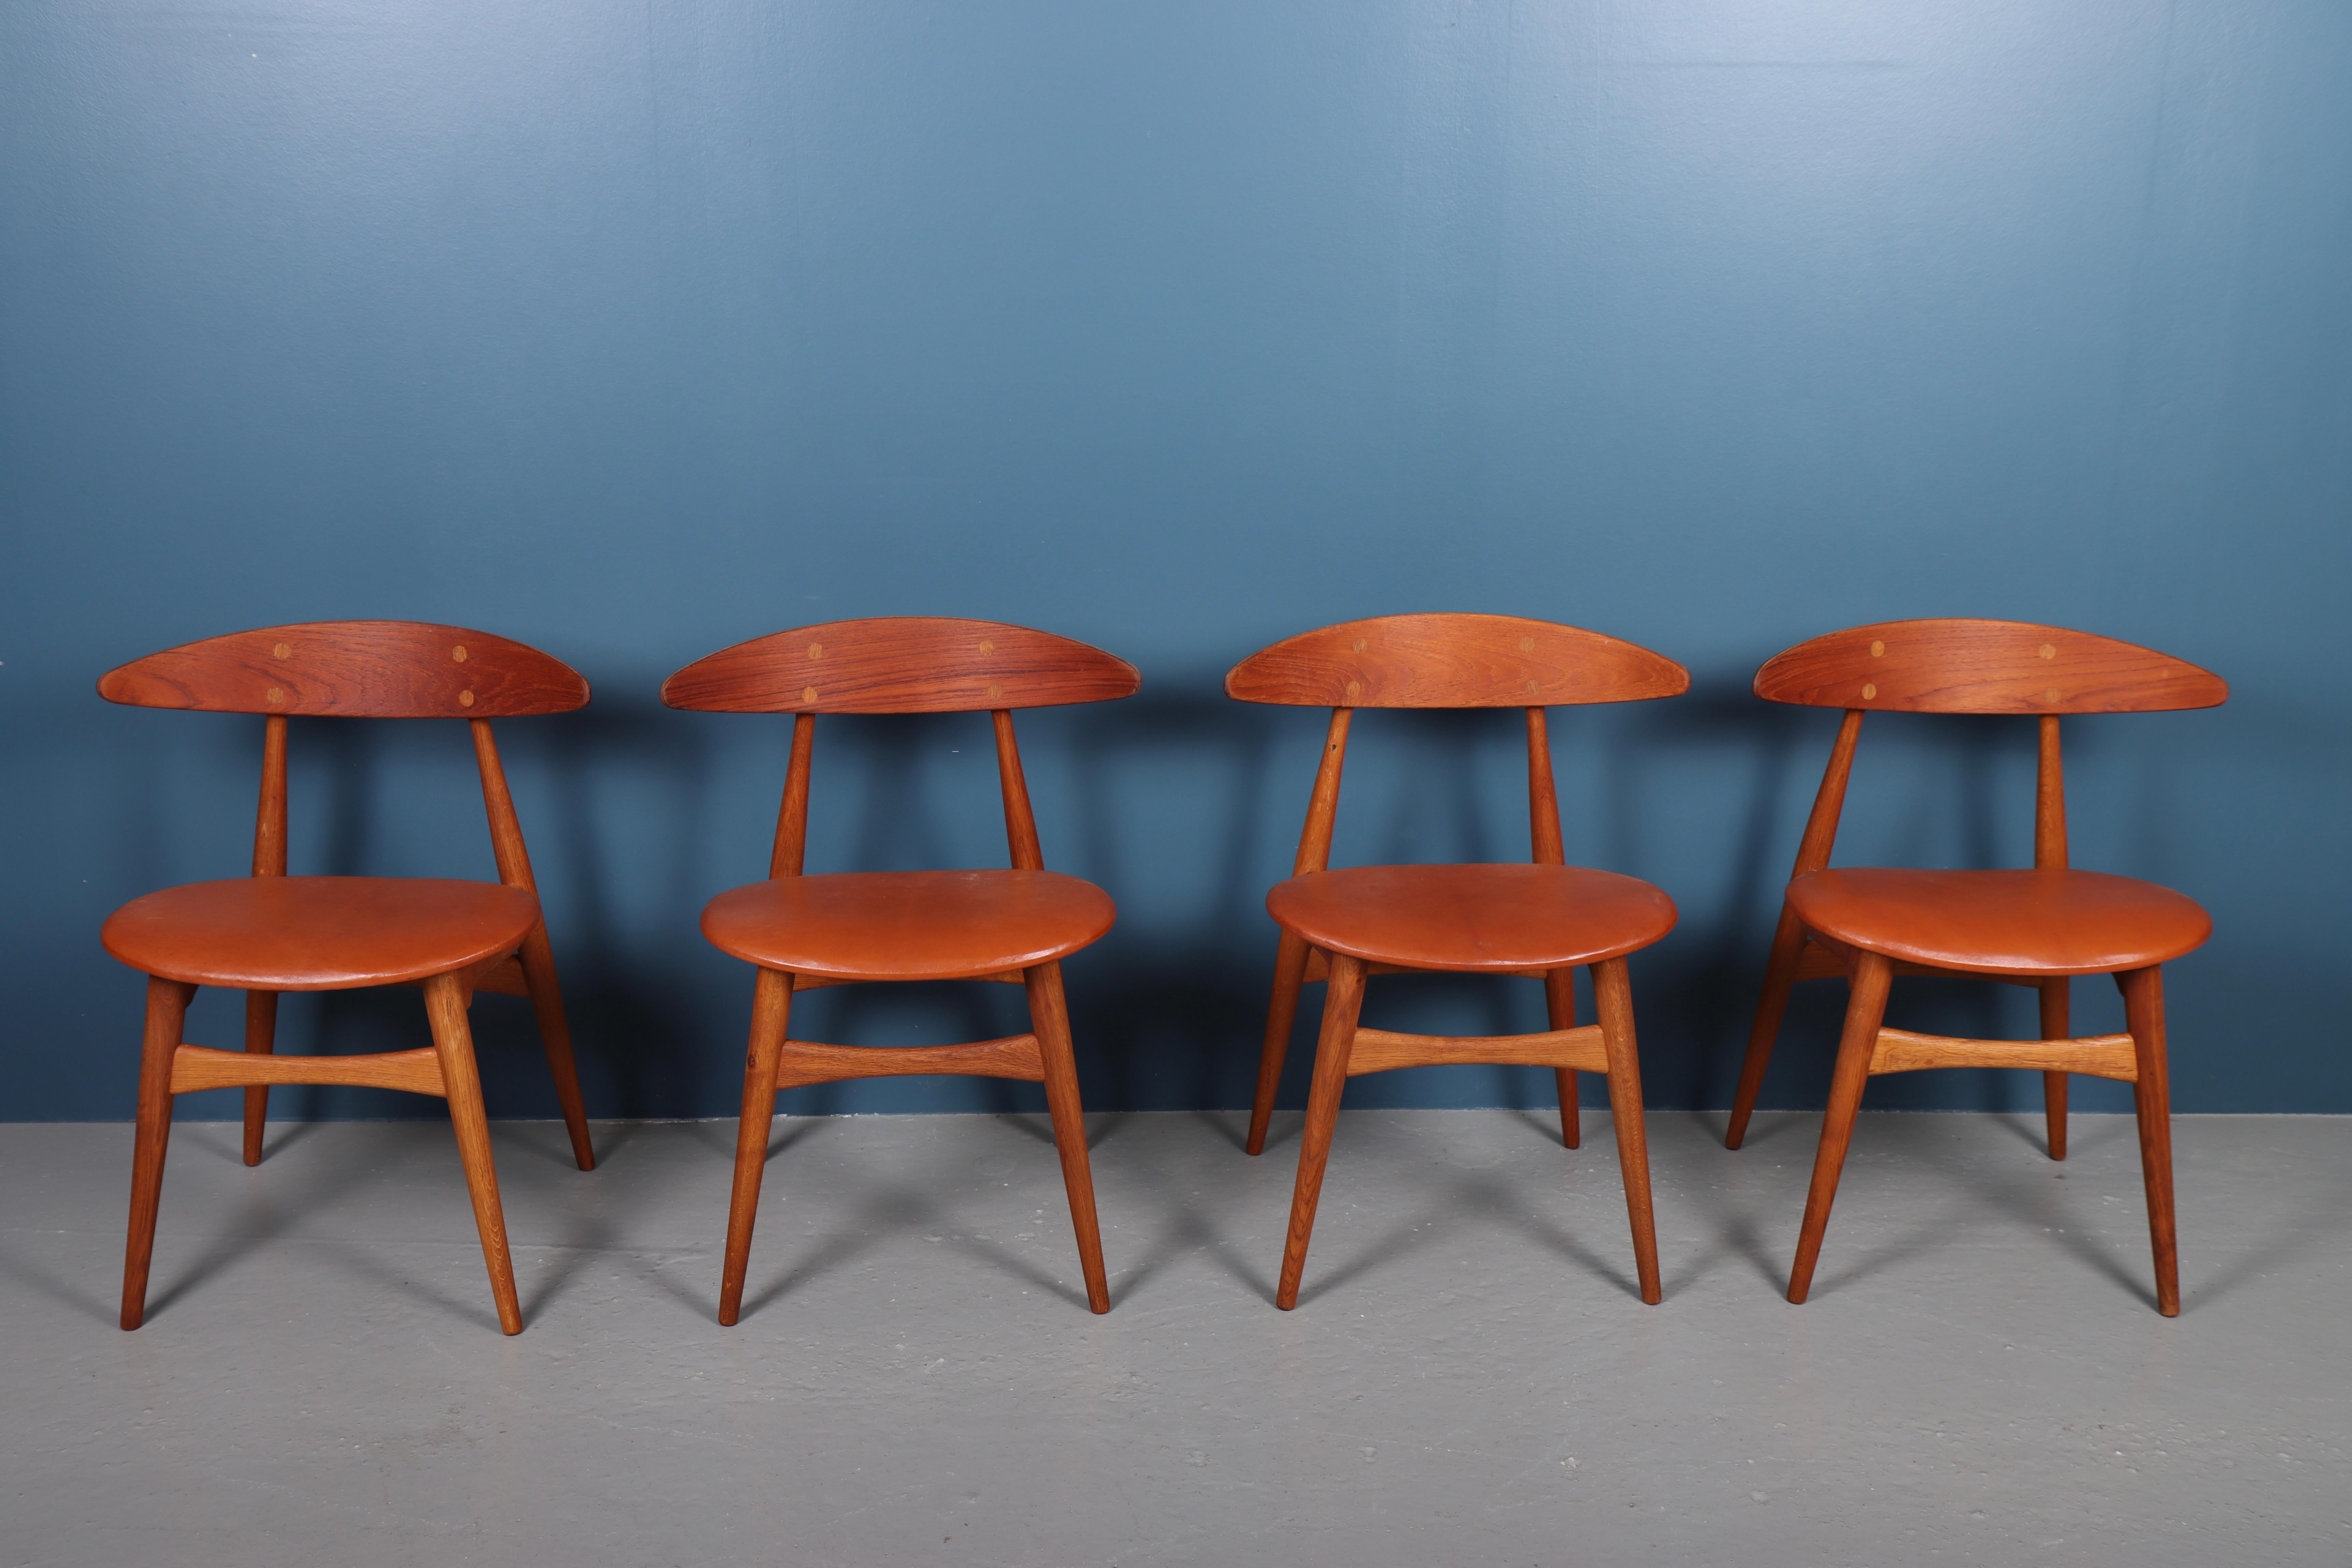 Set of four side chairs in teak, oak and patinated leather. Designed by Hans J. Wegner and made by Carl Hansen & Søn in the 1950s. The model name is CH33.